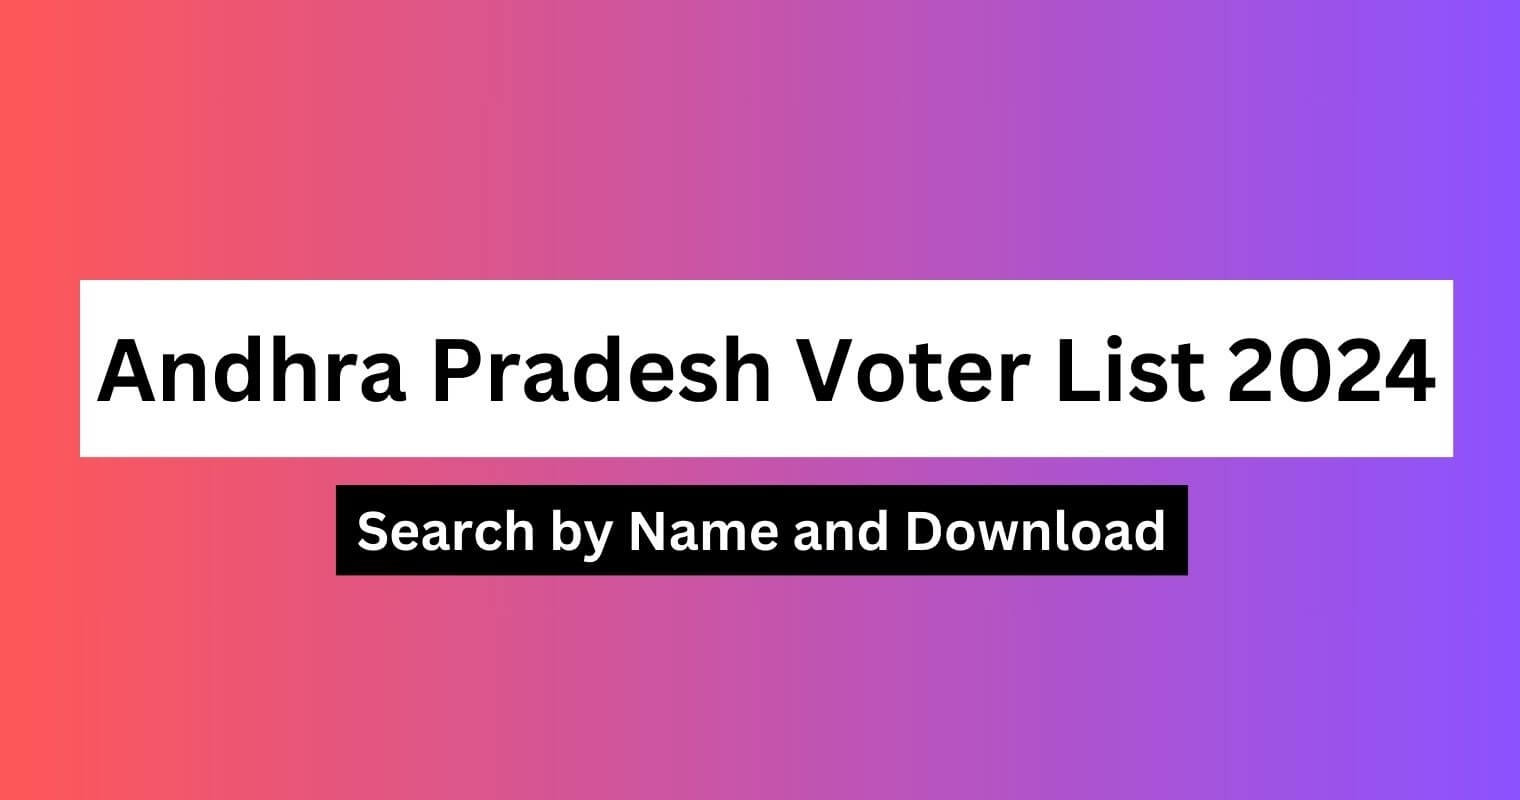 AP Voter List 2024 Search By Name, Download